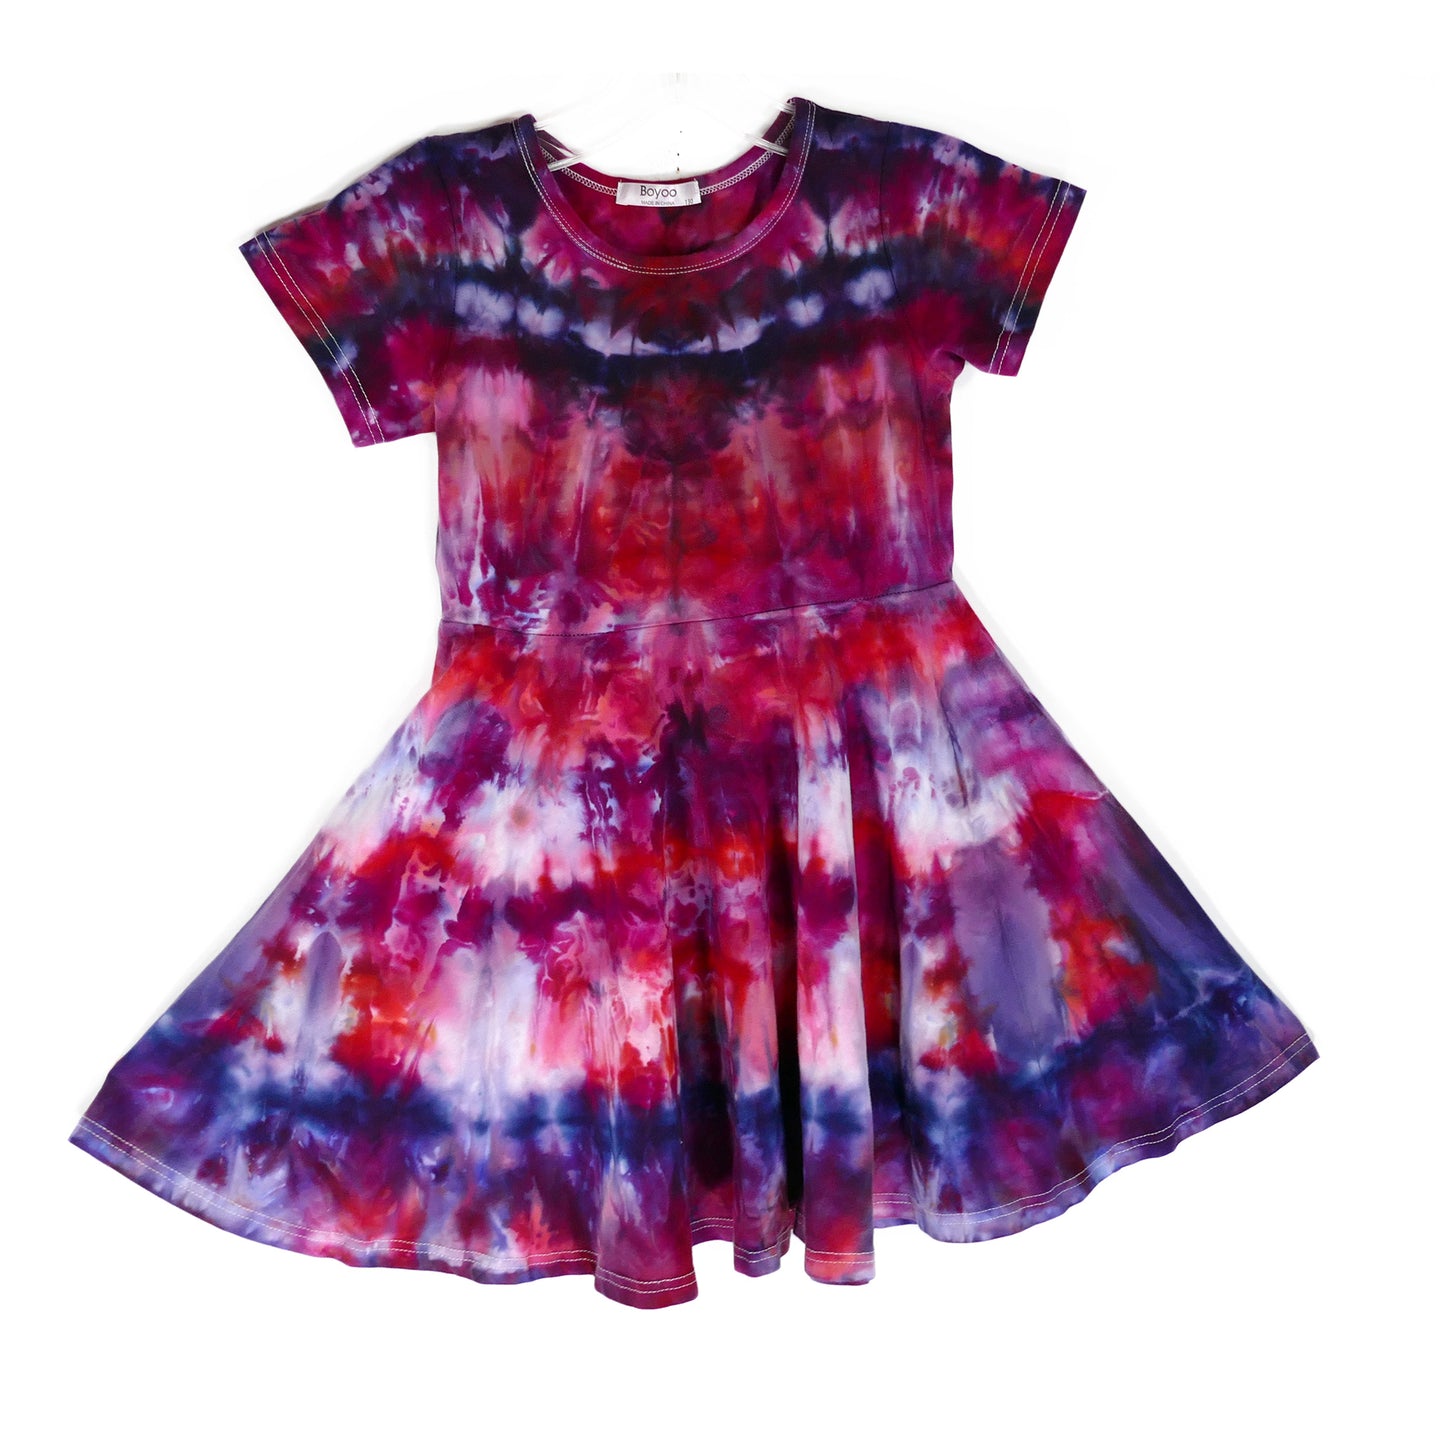 TIE-DYED girls dress size 8-9 yrs Youth size